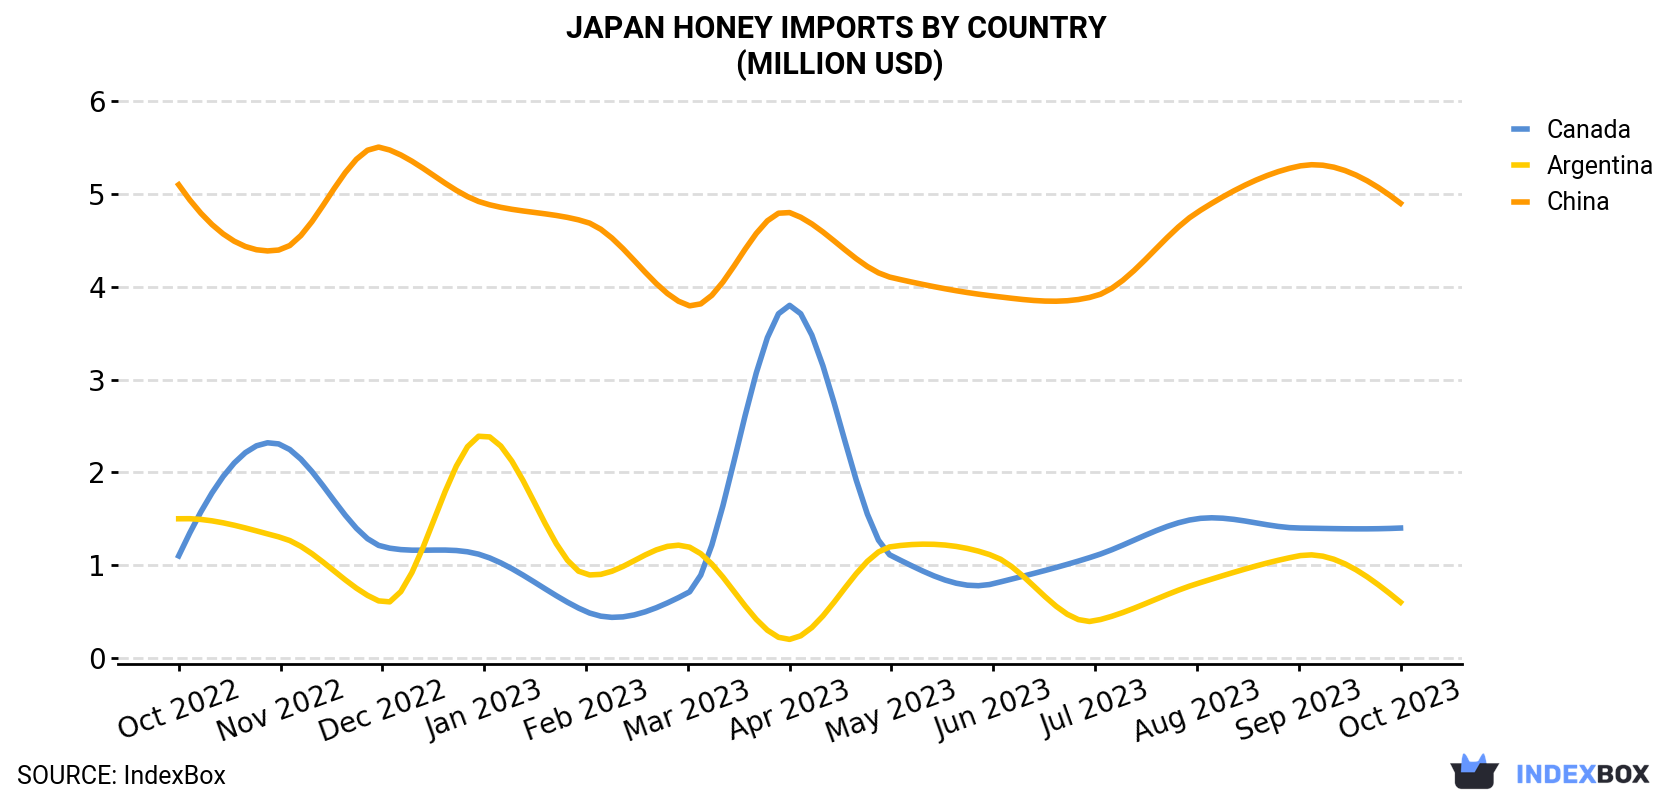 Japan Honey Imports By Country (Million USD)